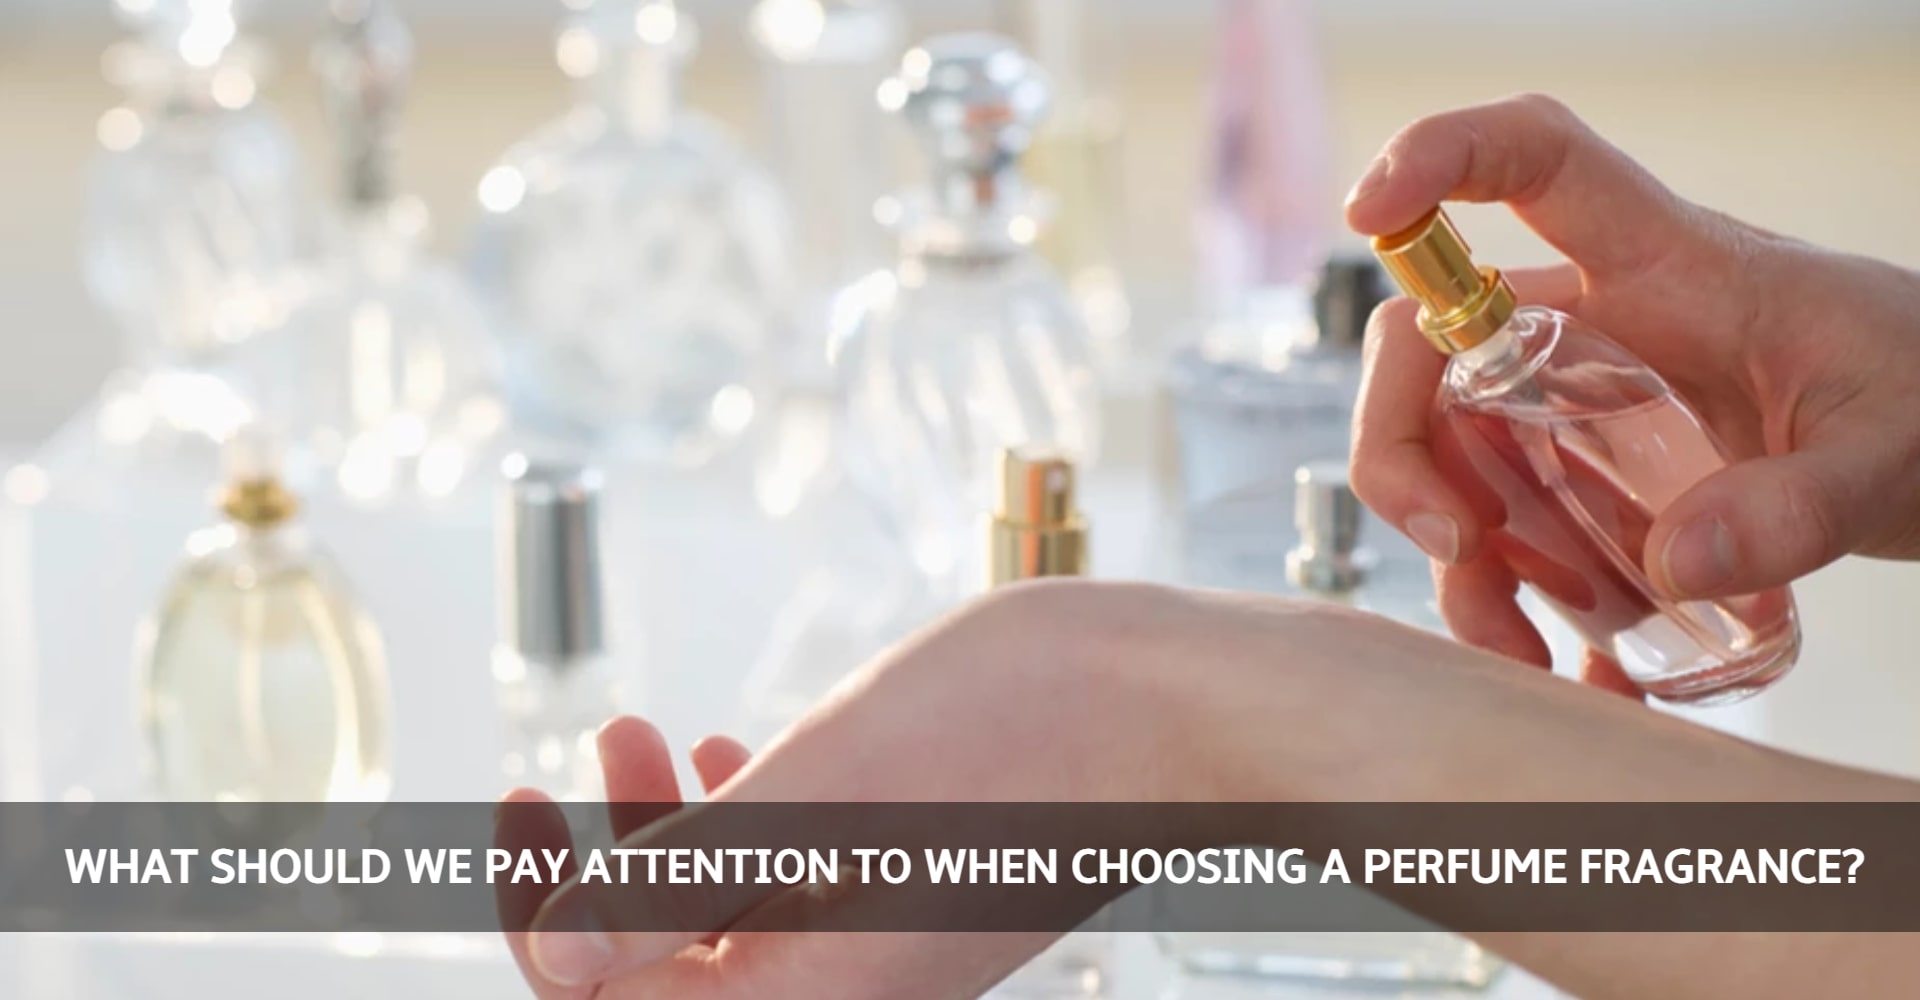 WHAT SHOULD WE PAY ATTENTION TO WHEN CHOOSING PERFUMES?